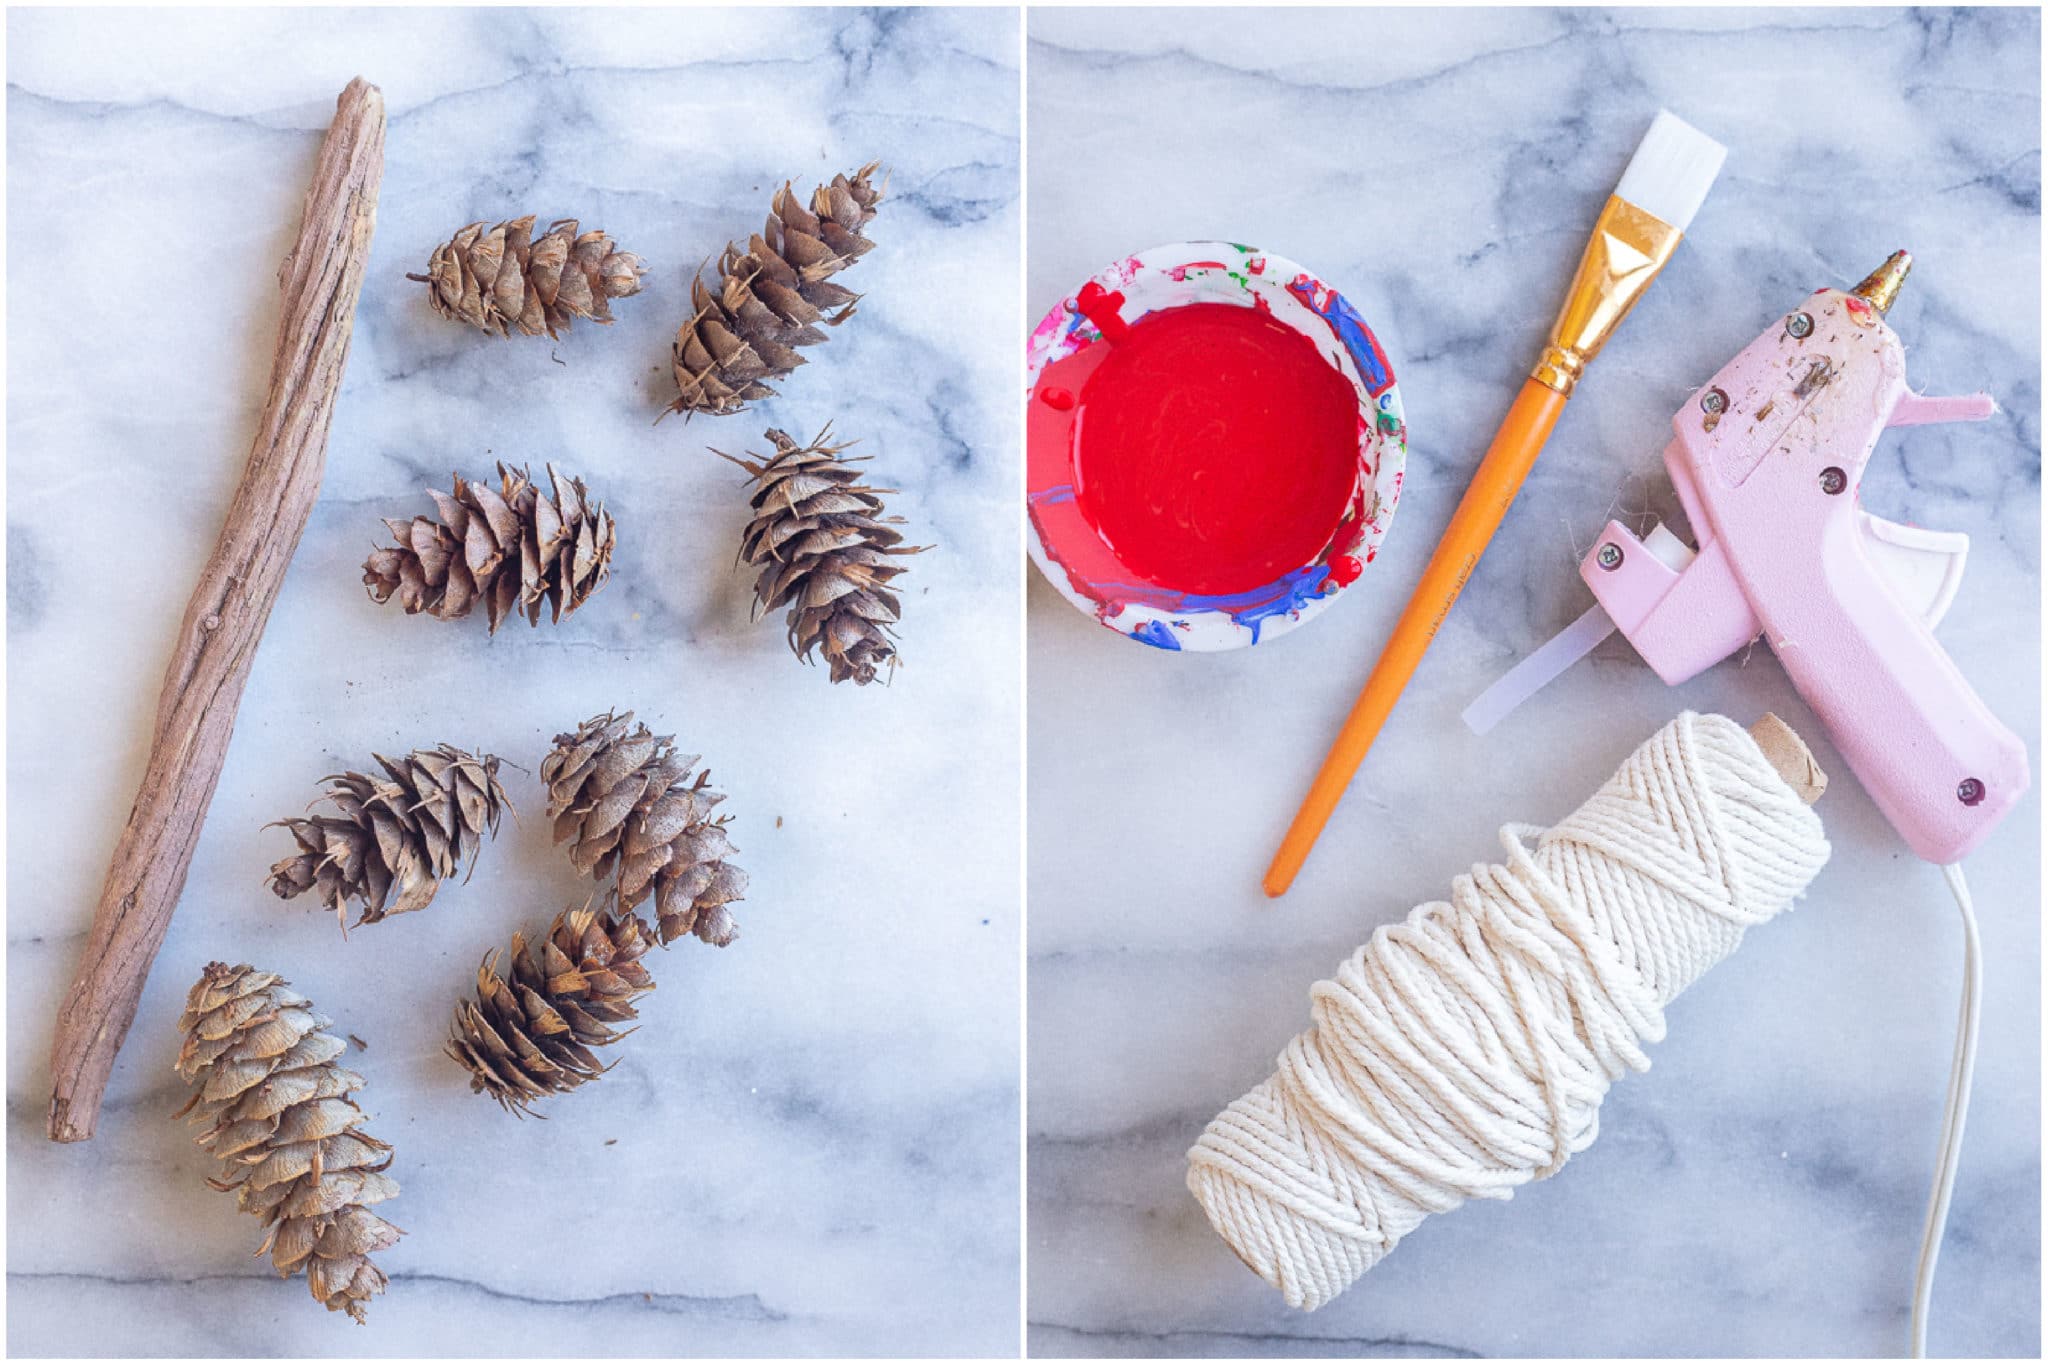 all the materials needed to make a pinecone ristra craft